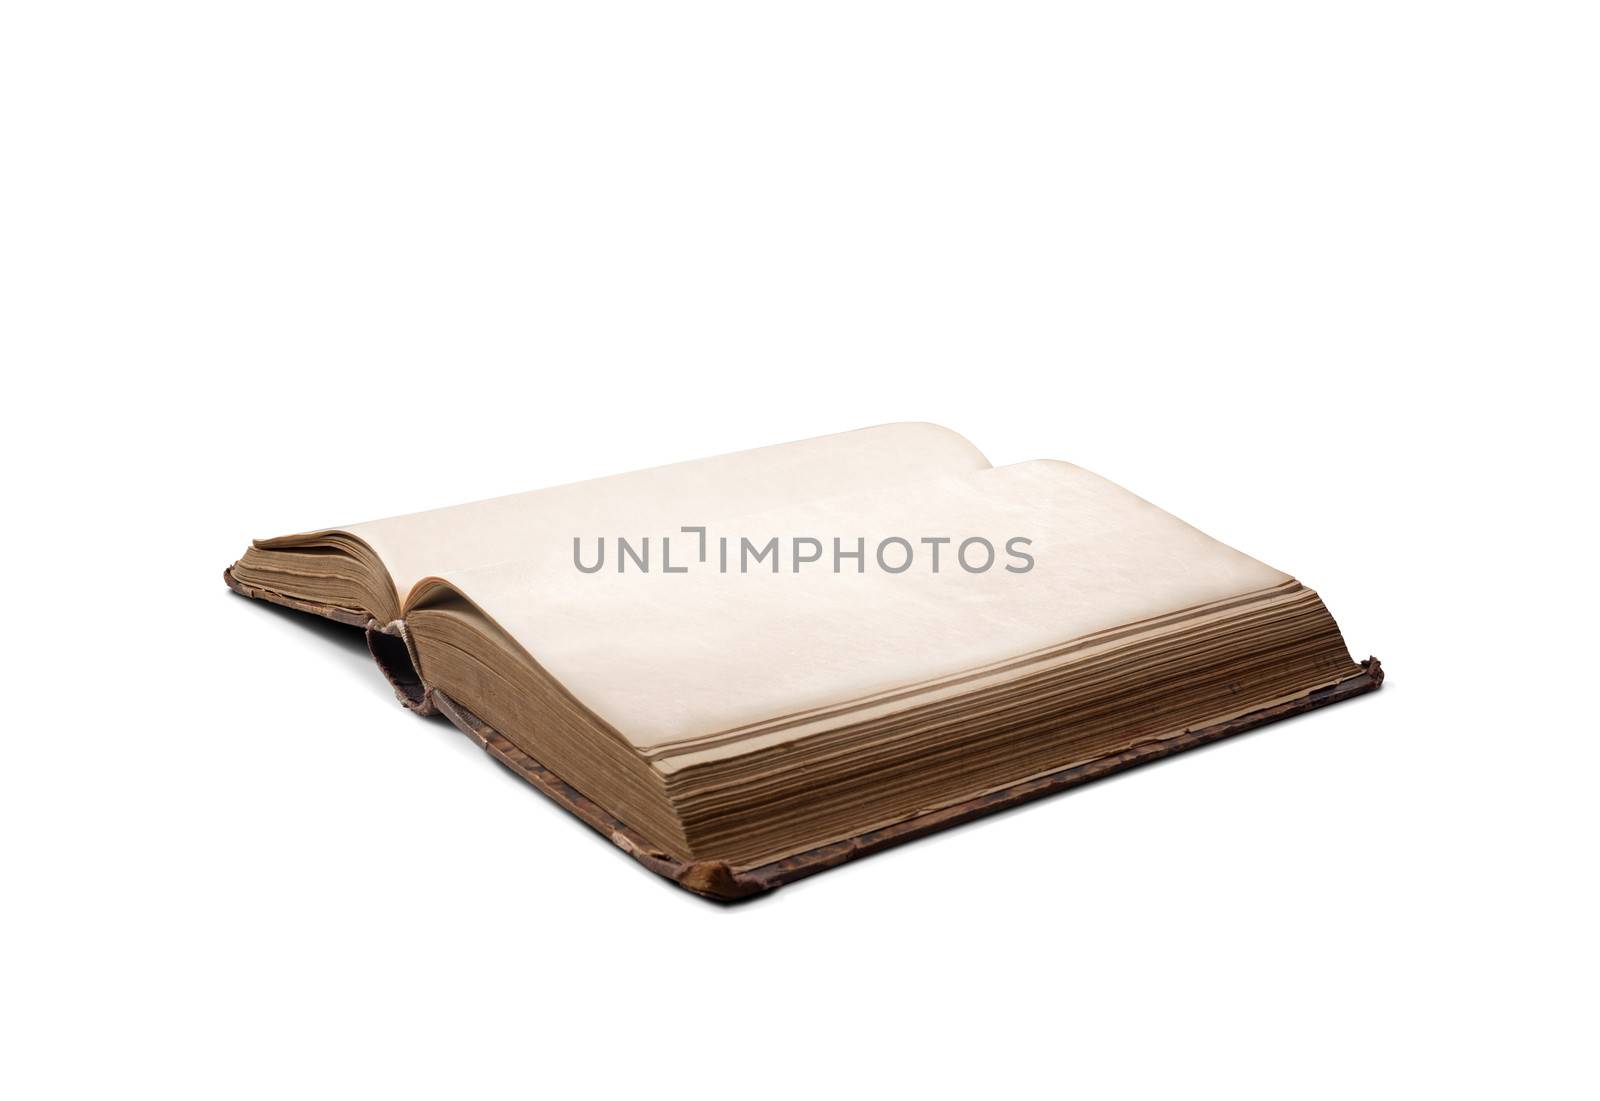 Ancient open book with blank pages on white background.